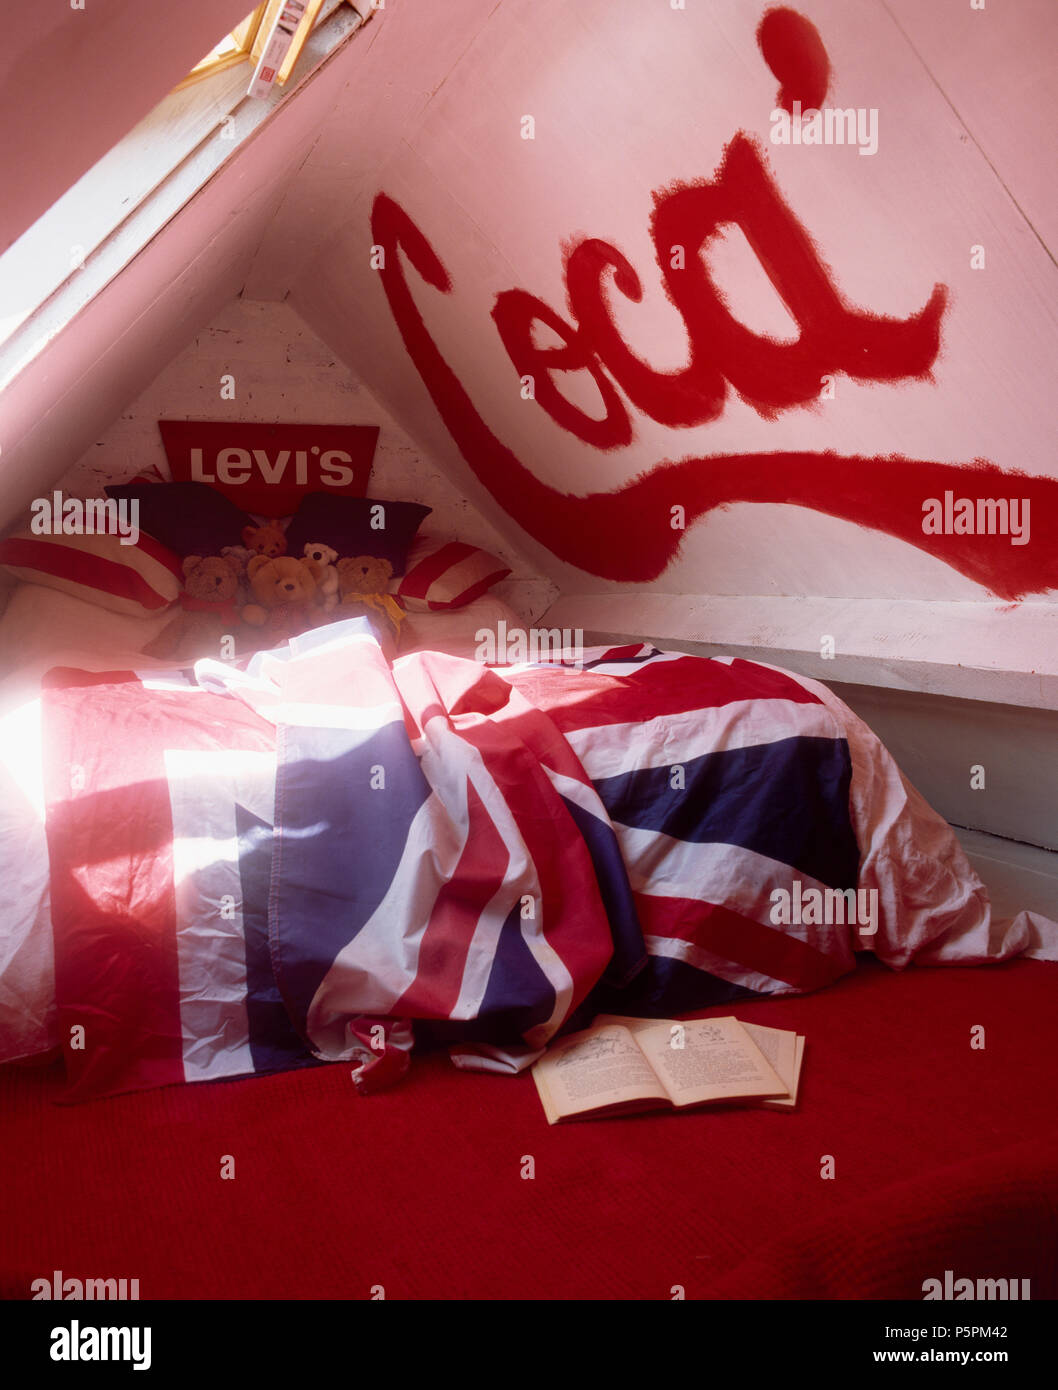 Coca' sign painted on ceiling in economy-style teenage bedroom with Union Jack flag covering the bed Stock Photo